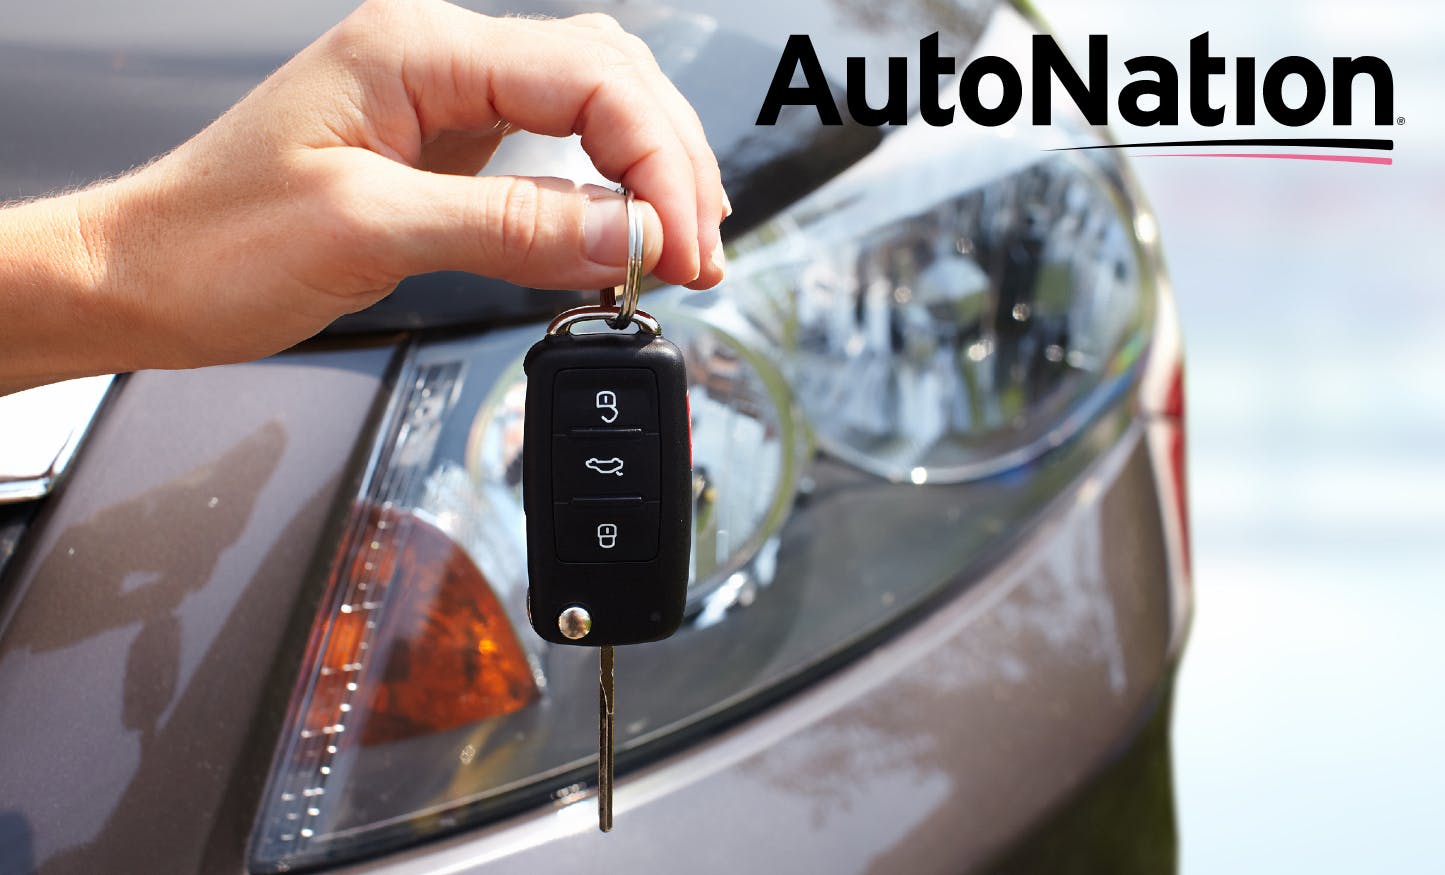 AutoNation: Dealership Vehicles, Services, and Full Review